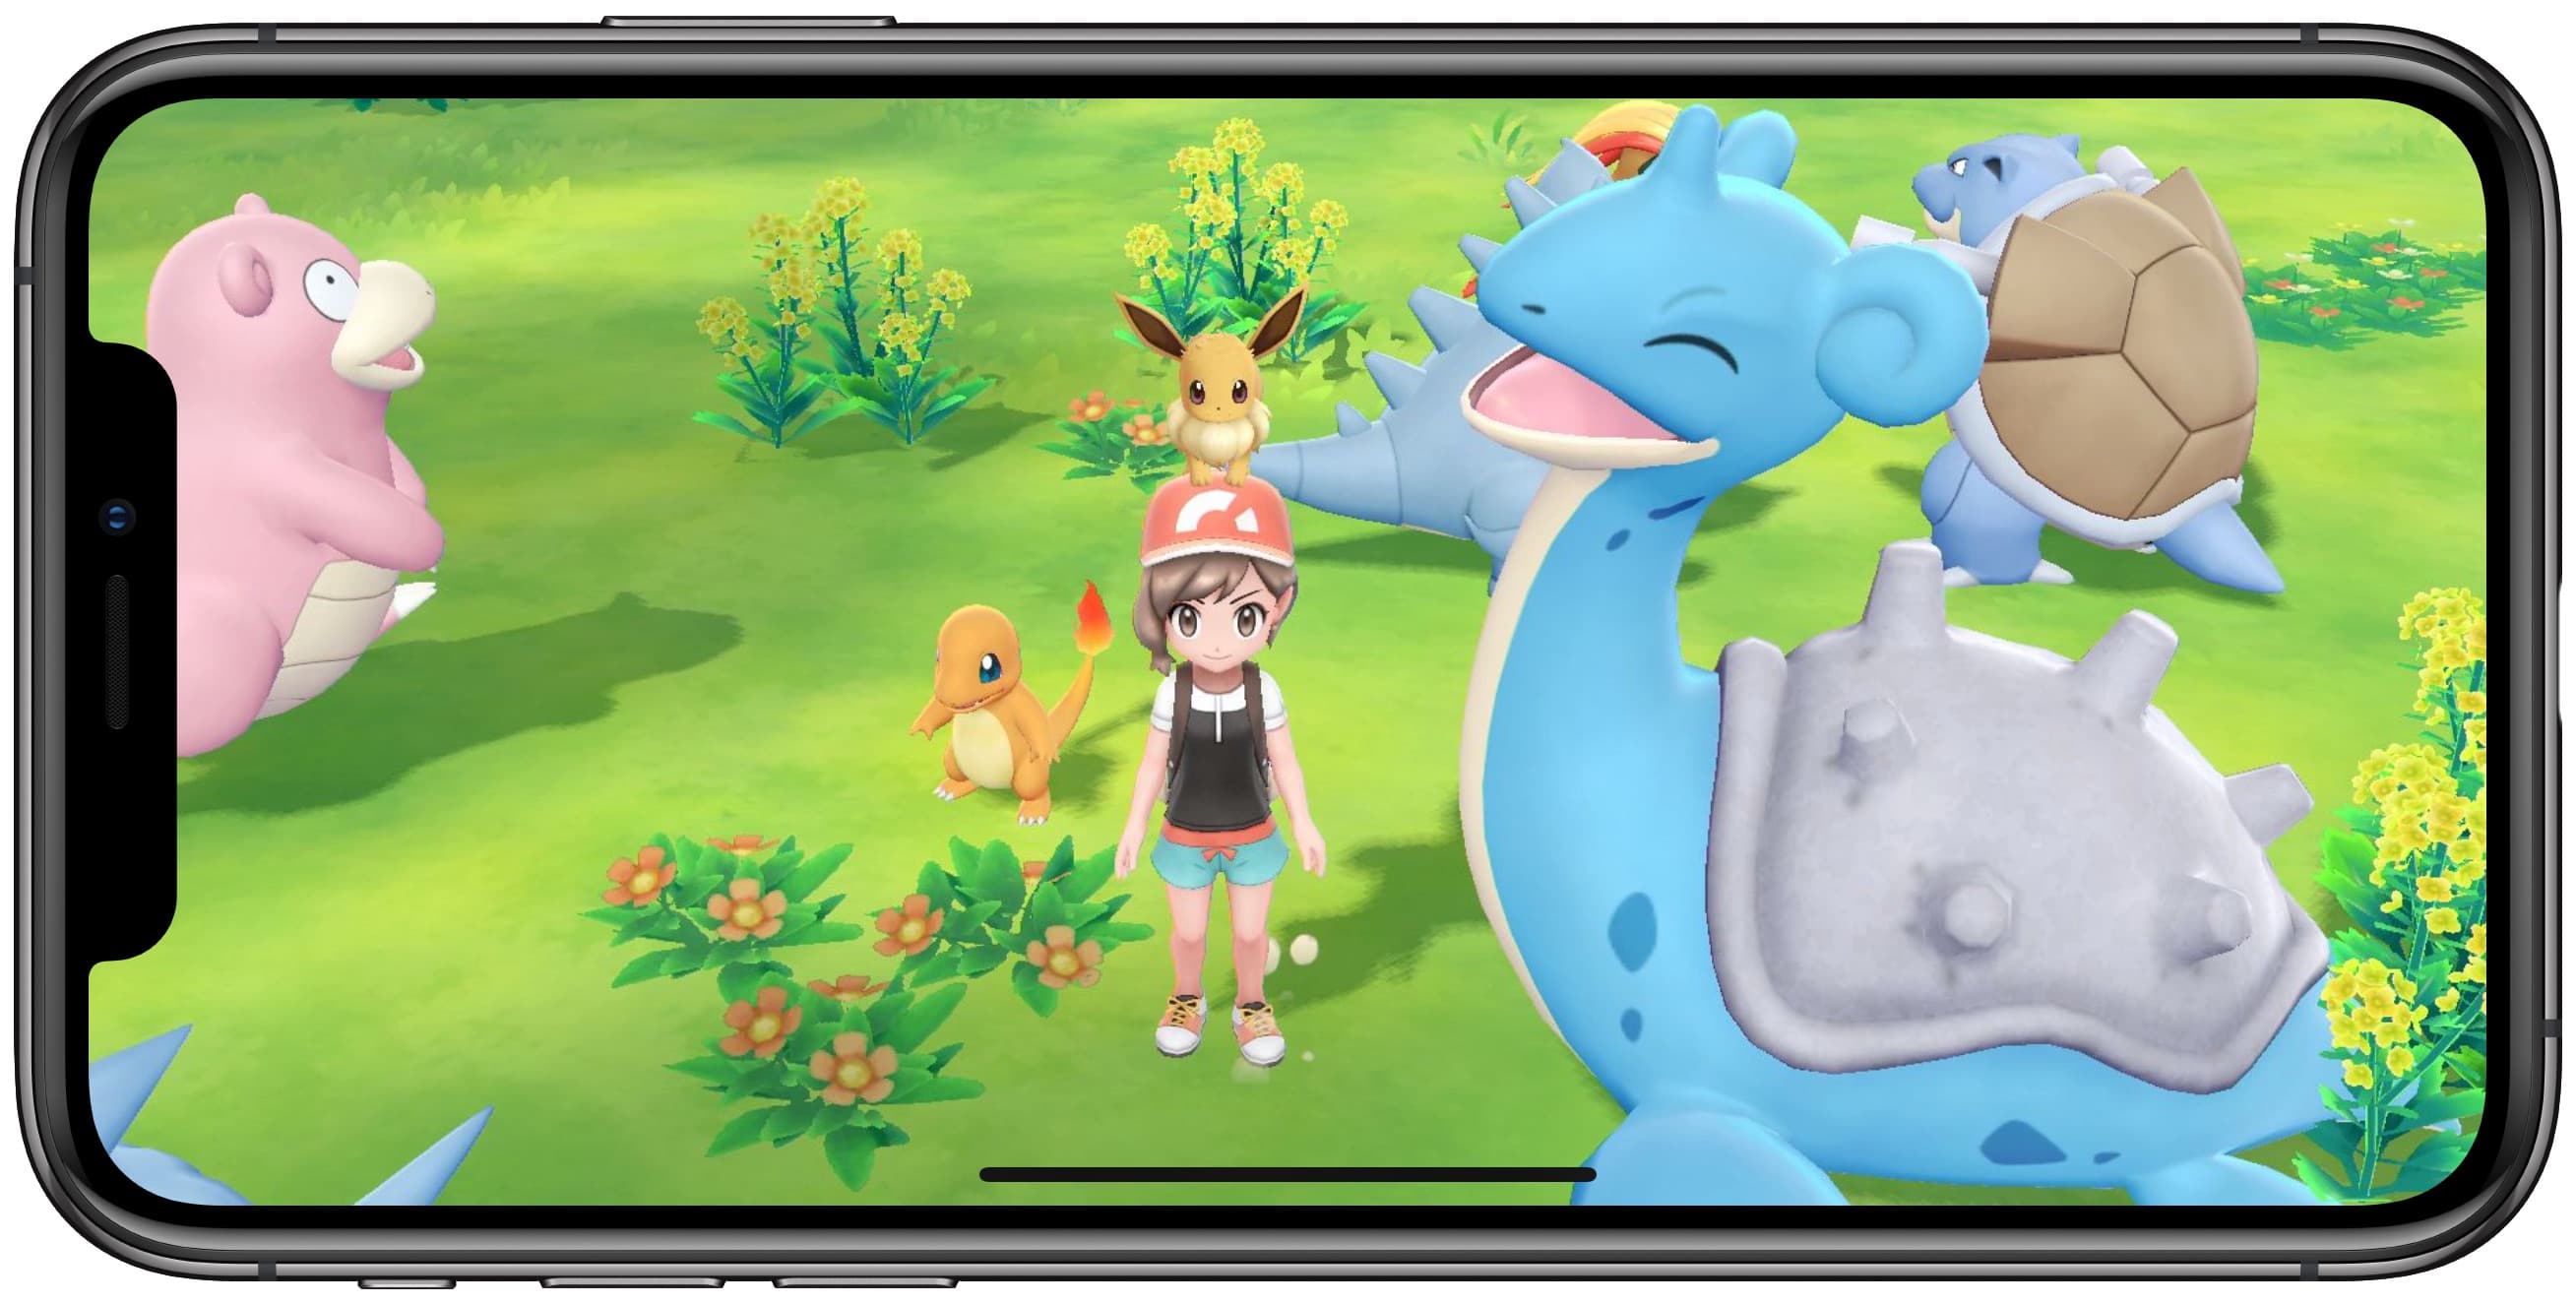 There's a brand new Pokémon game for Android and iOS